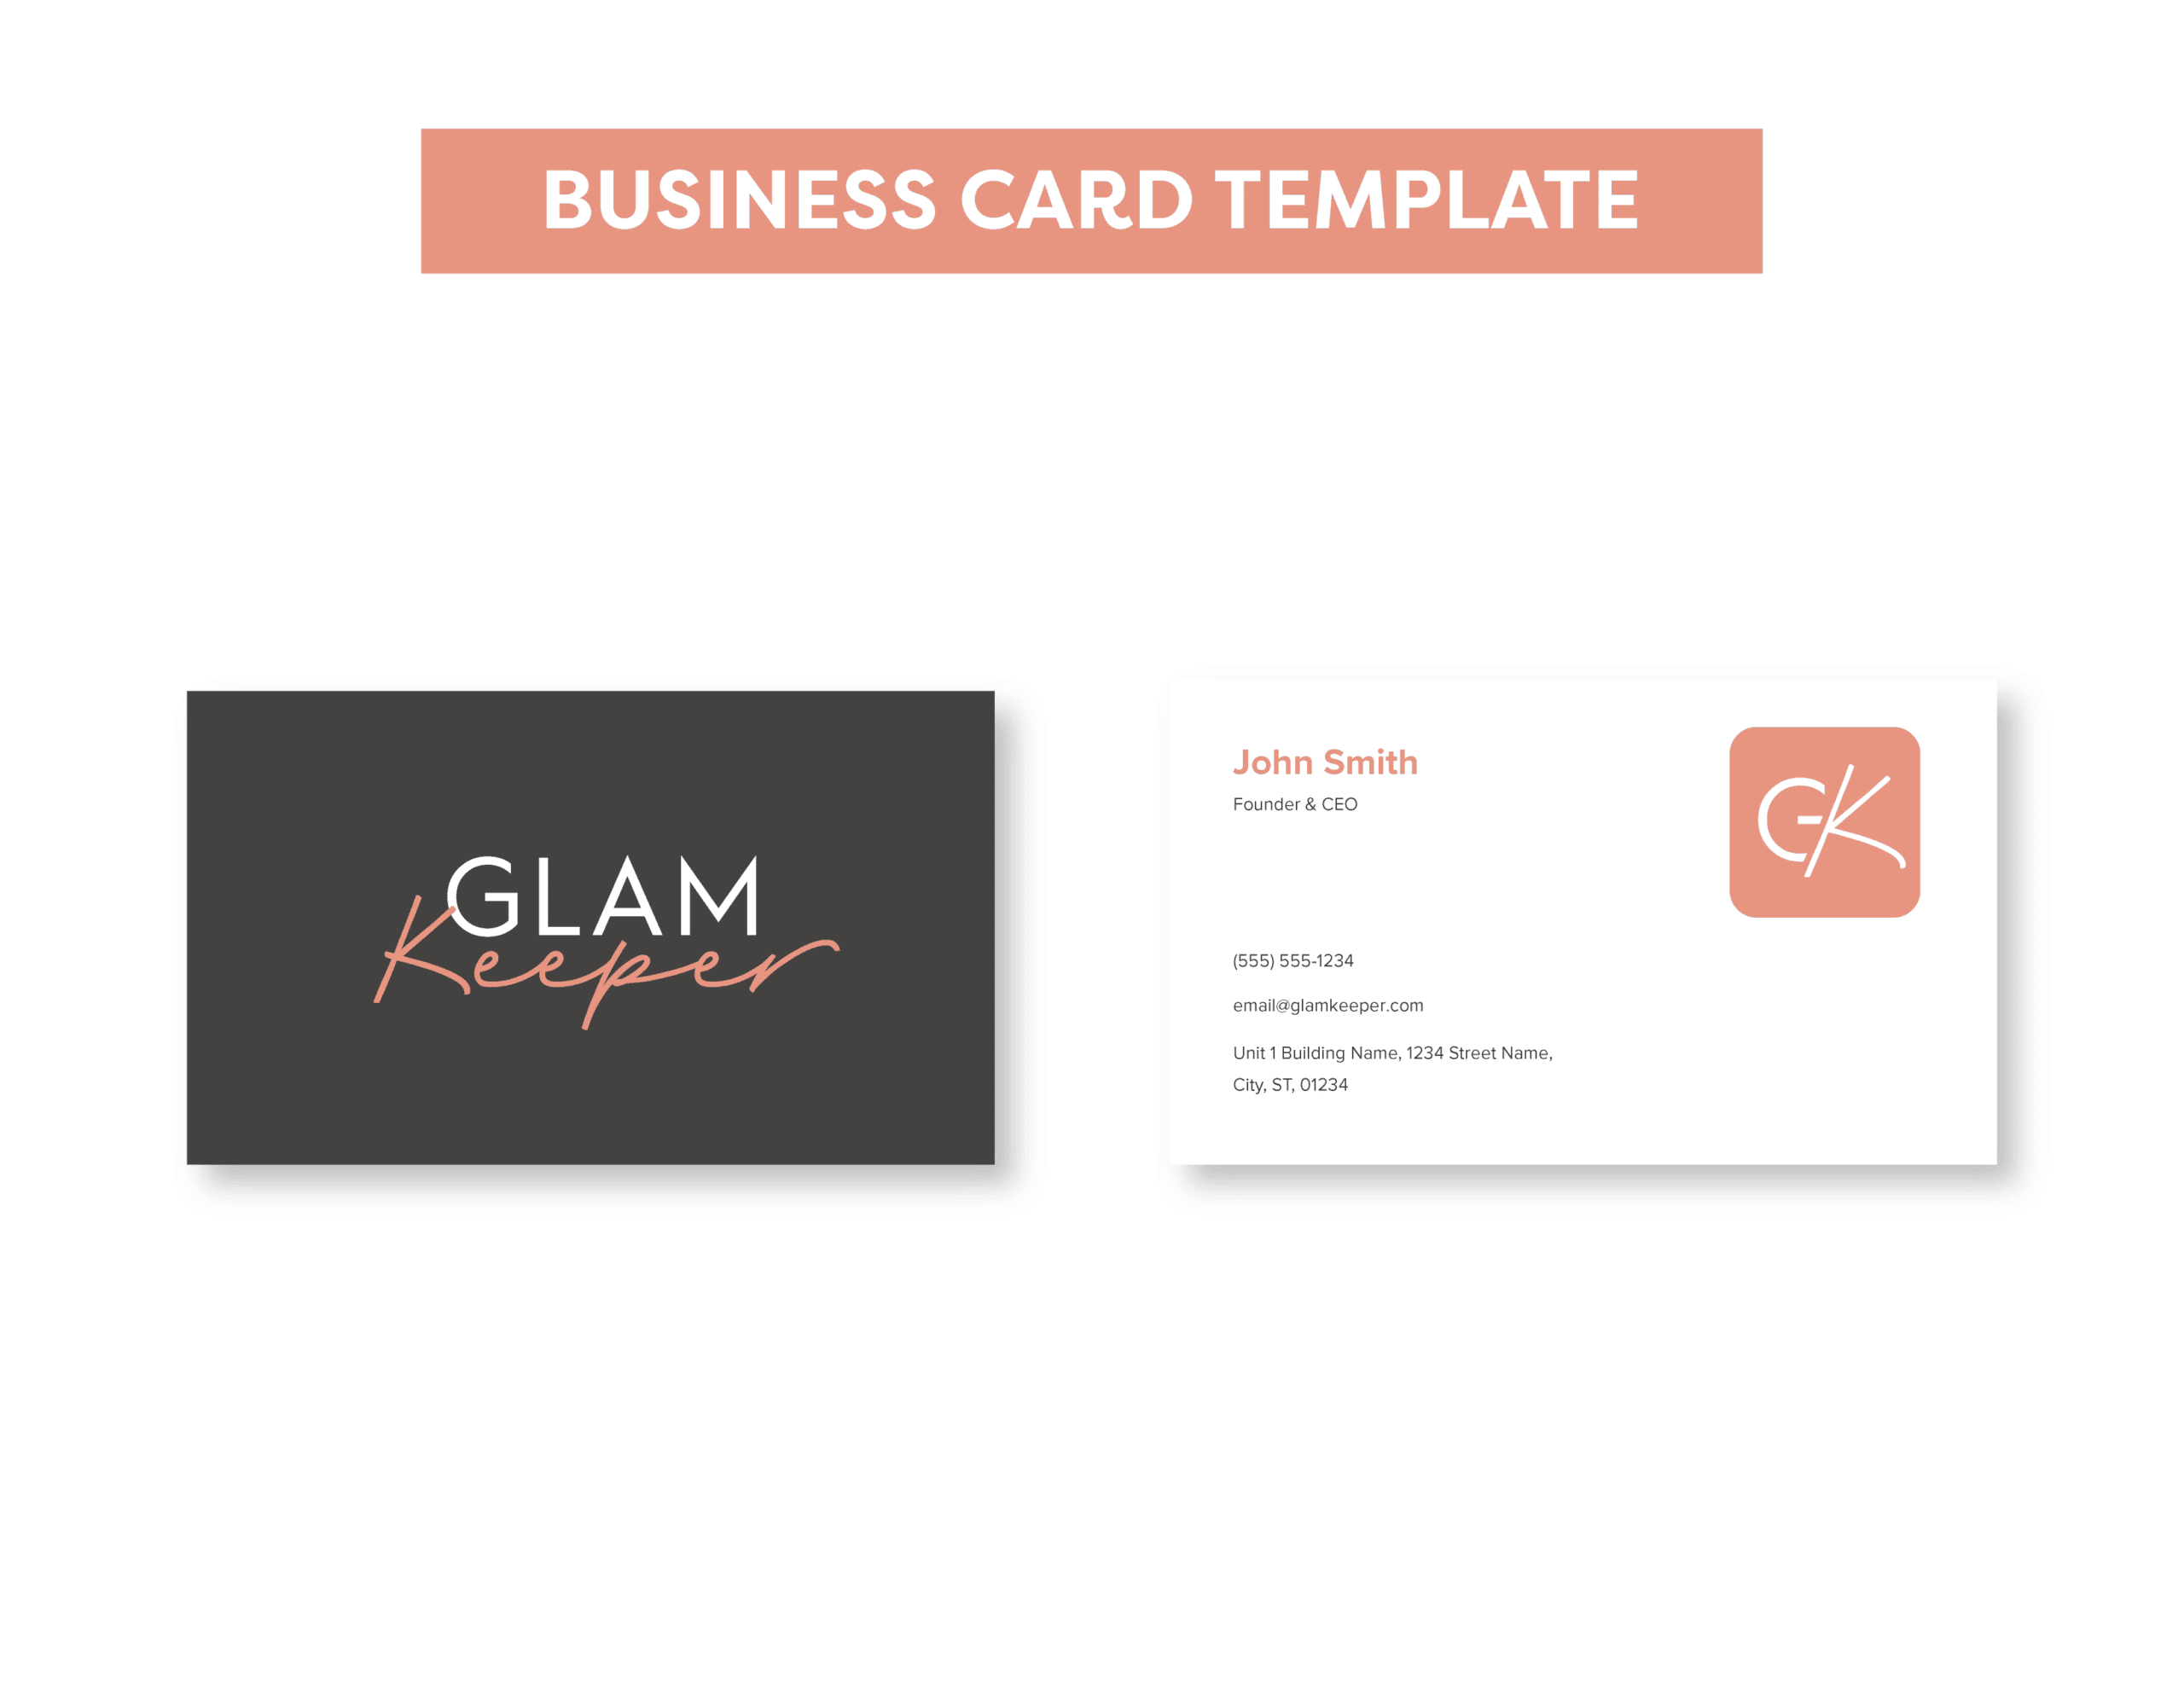 04Glam_Keeper__Business Card Template